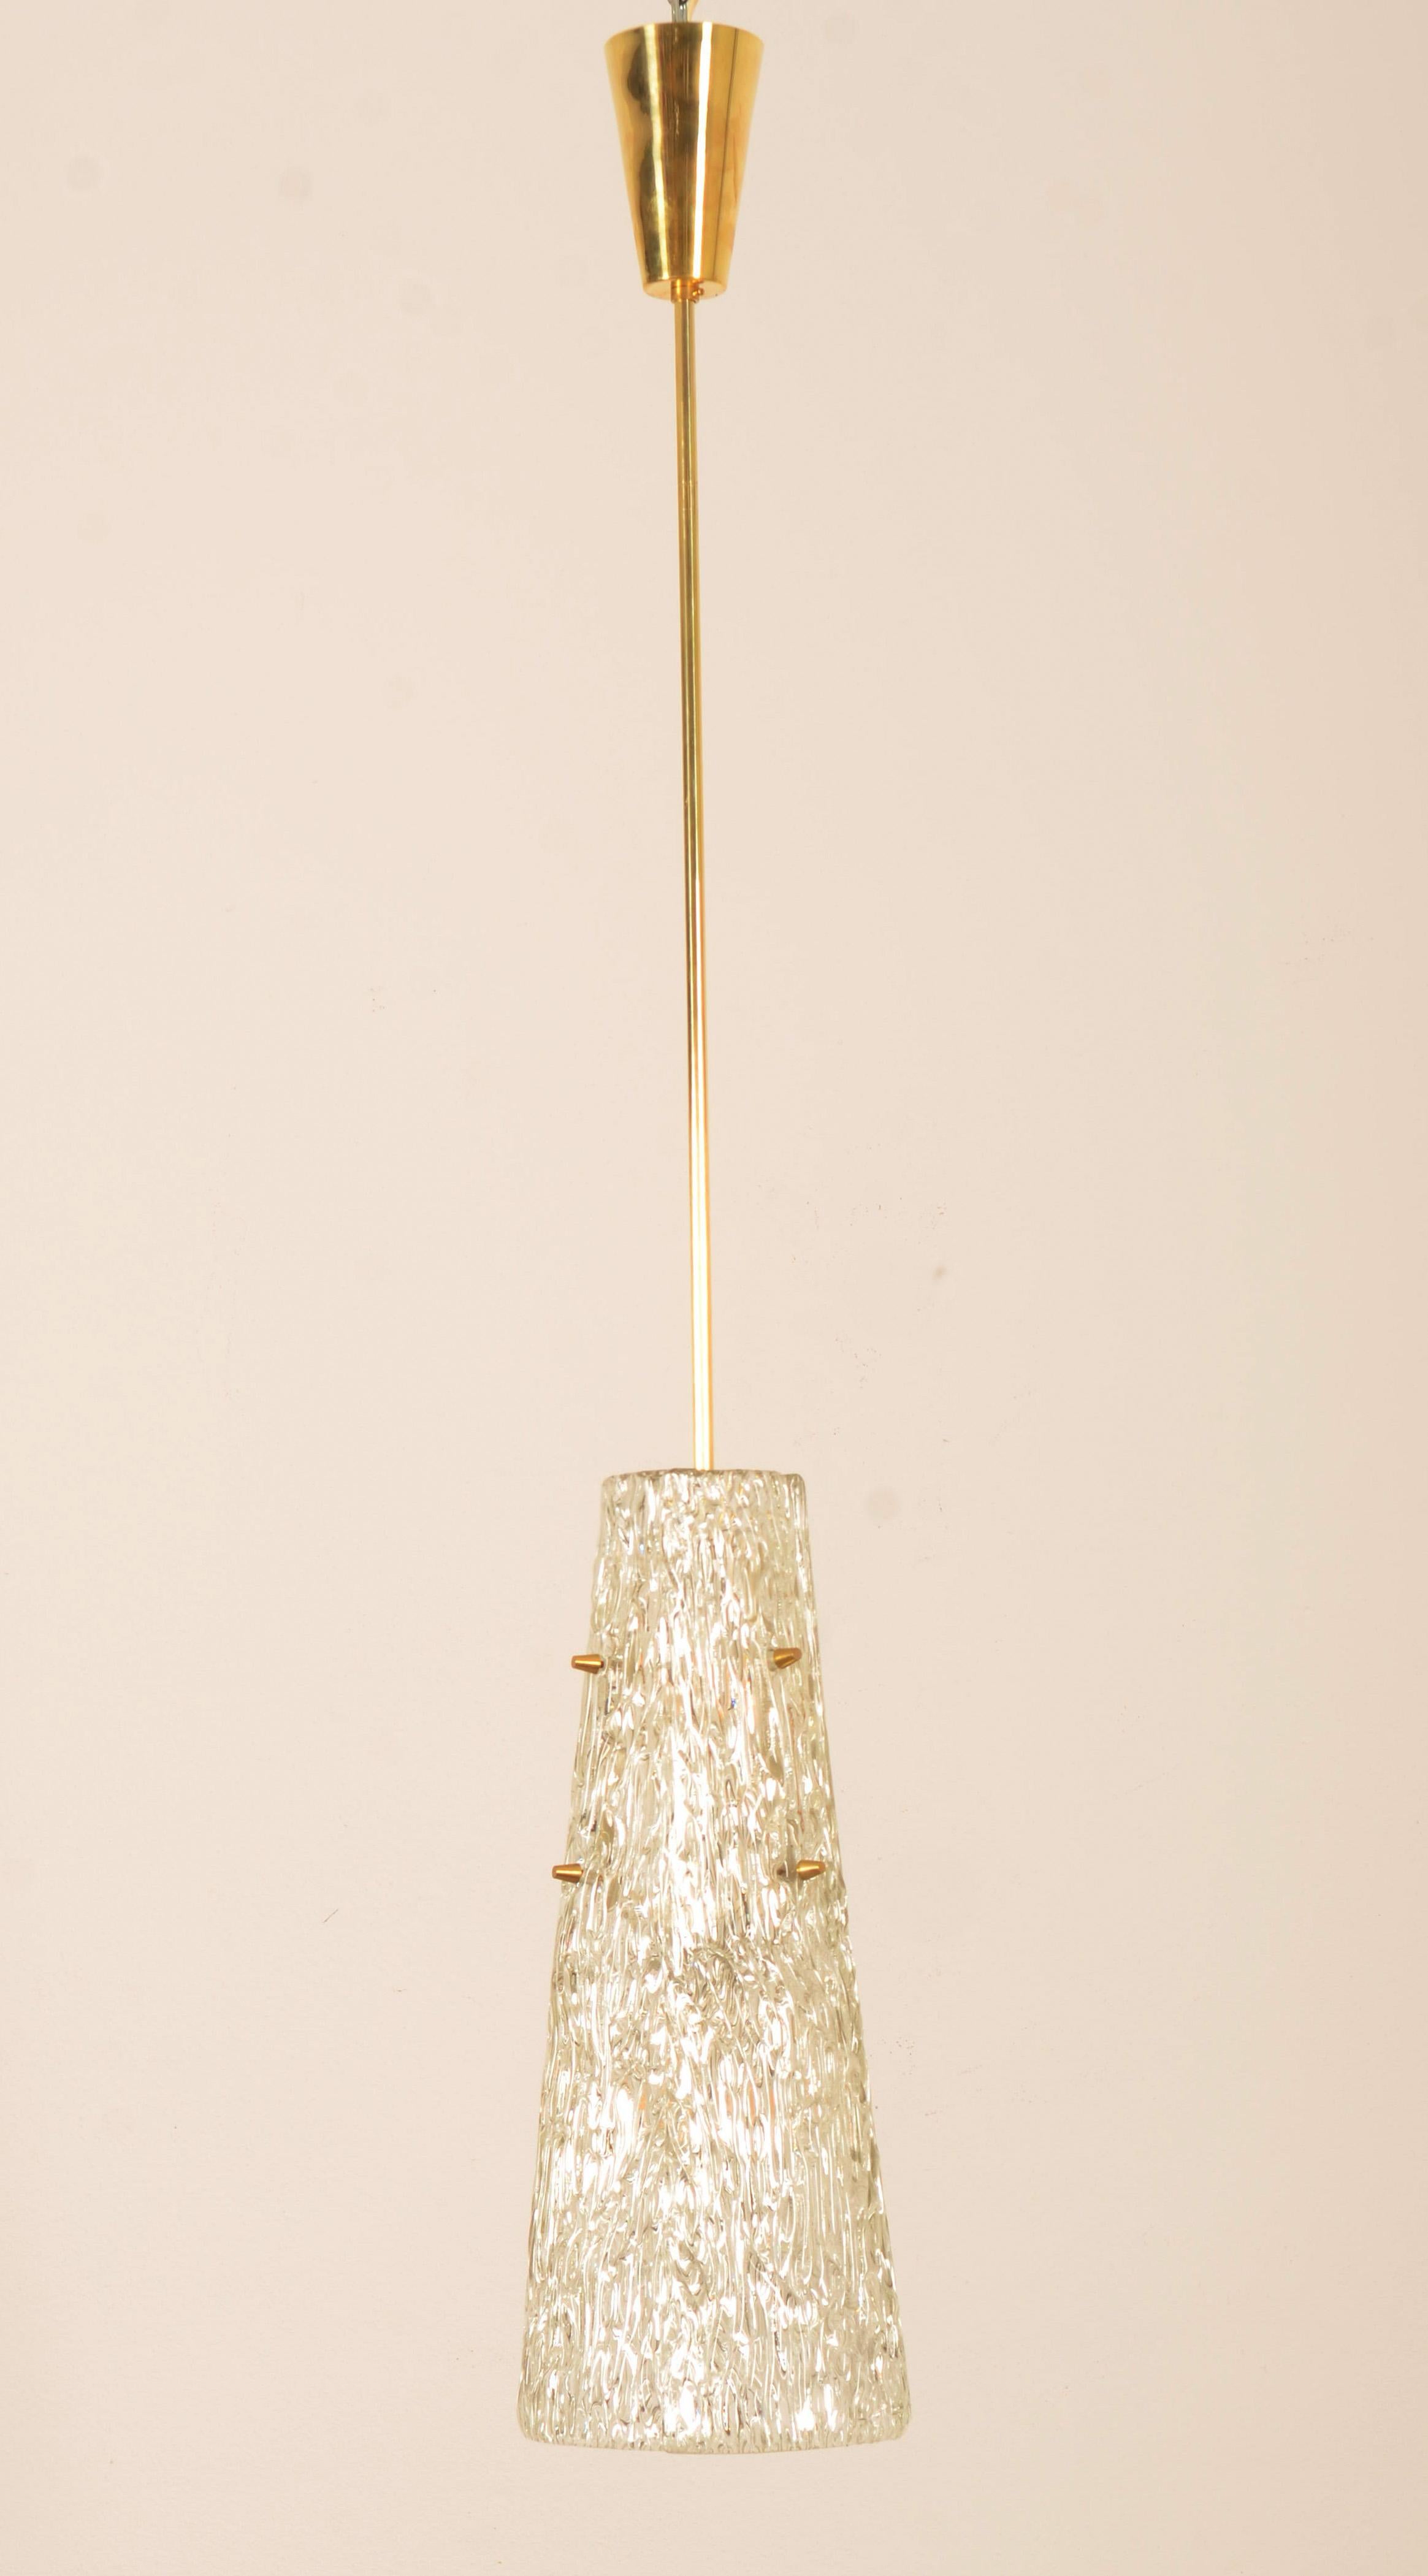 Mid-20th Century Midcentury J.T. Kalmar Crystal Structured Glass Pendant Lamp For Sale